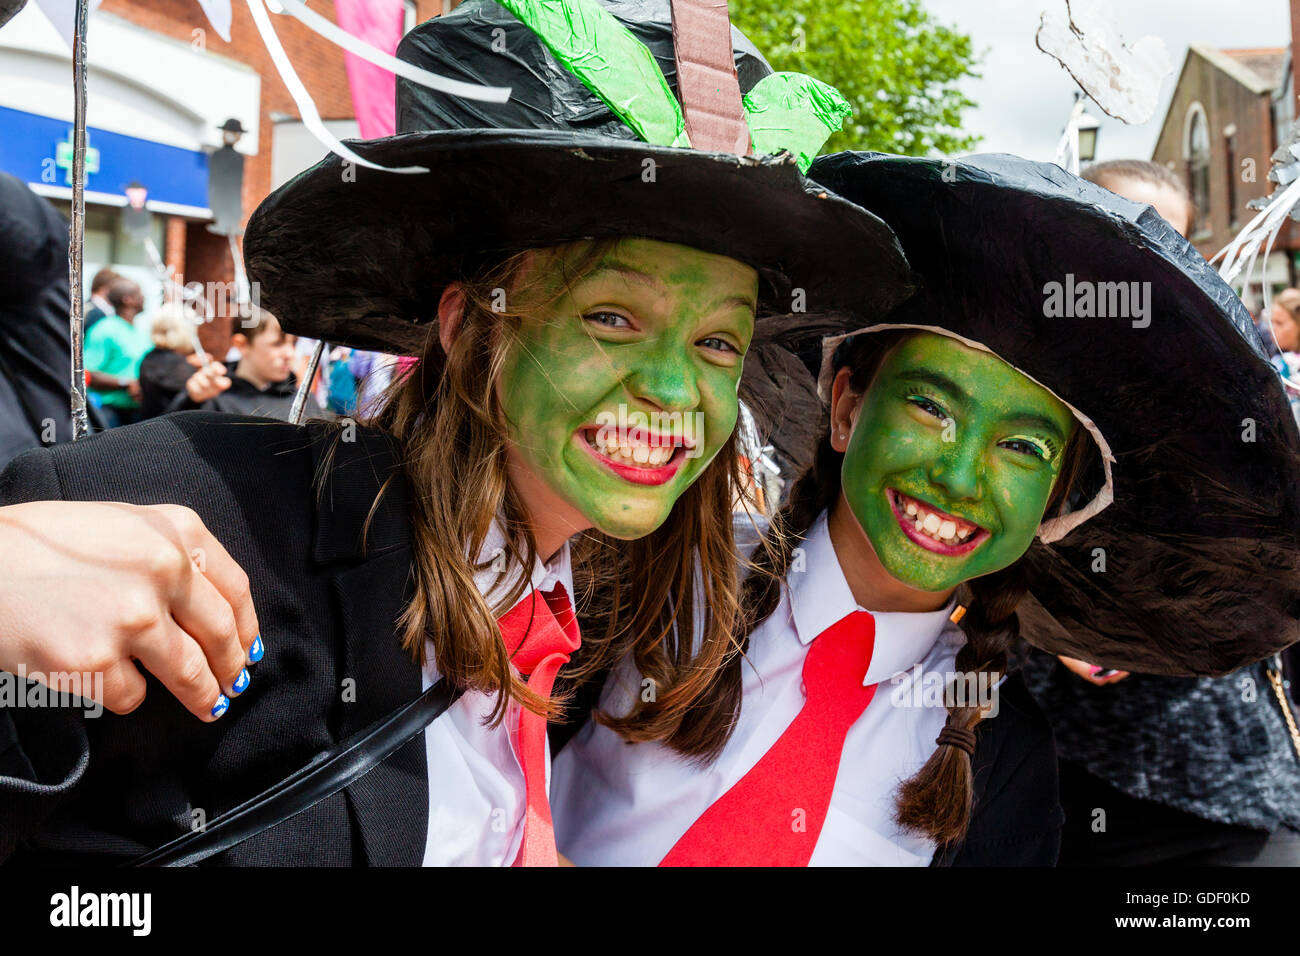 Two Girls In Costume Pose For A Photo During The Annual Lewes Schools 'Moving On' Parade, High Street, Lewes, East Sussex, UK Stock Photo